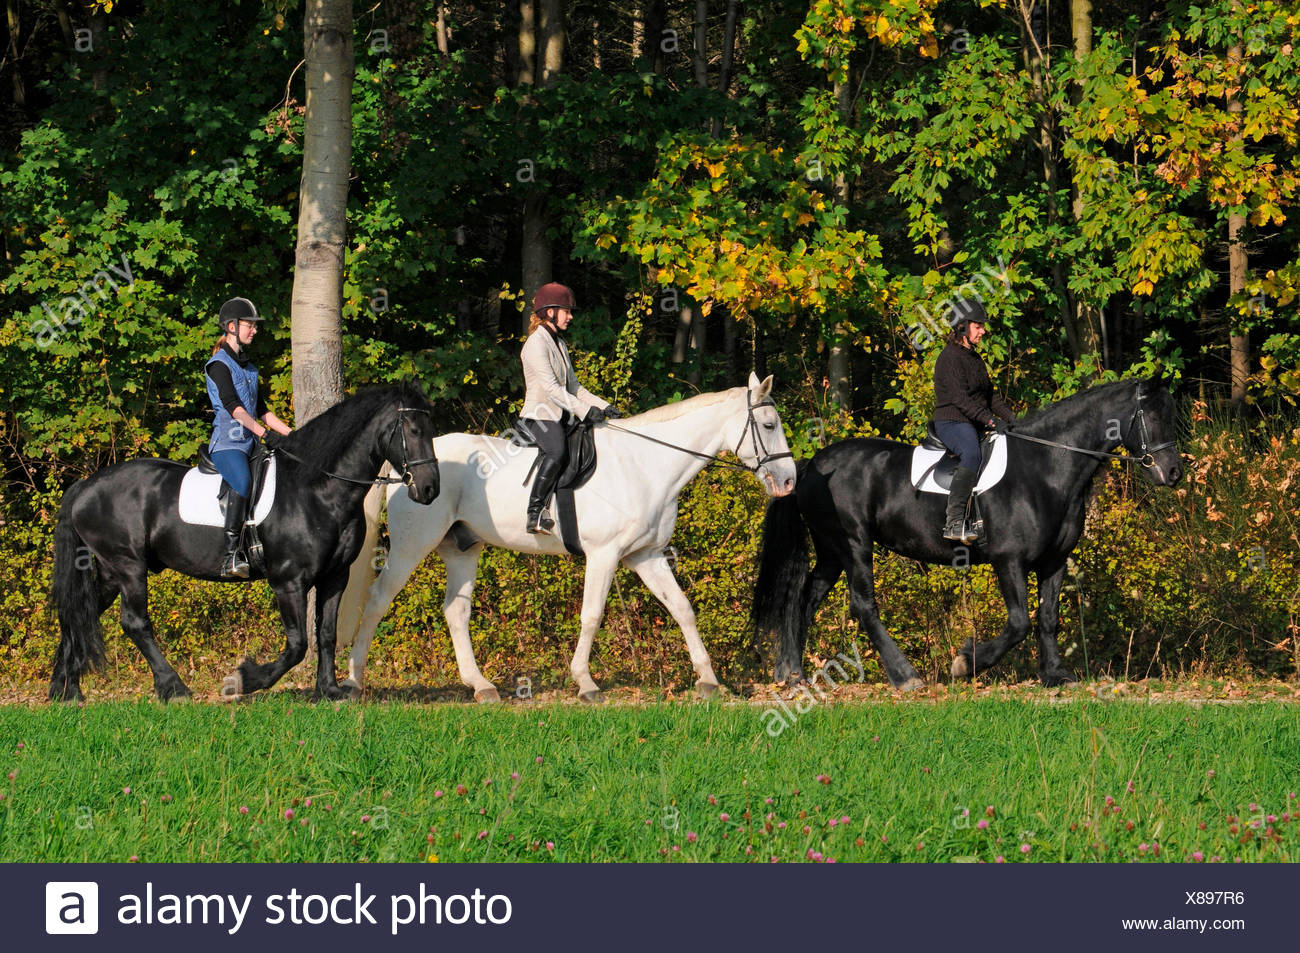 Woman Riding Friesian Horse High Resolution Stock Photography and ...